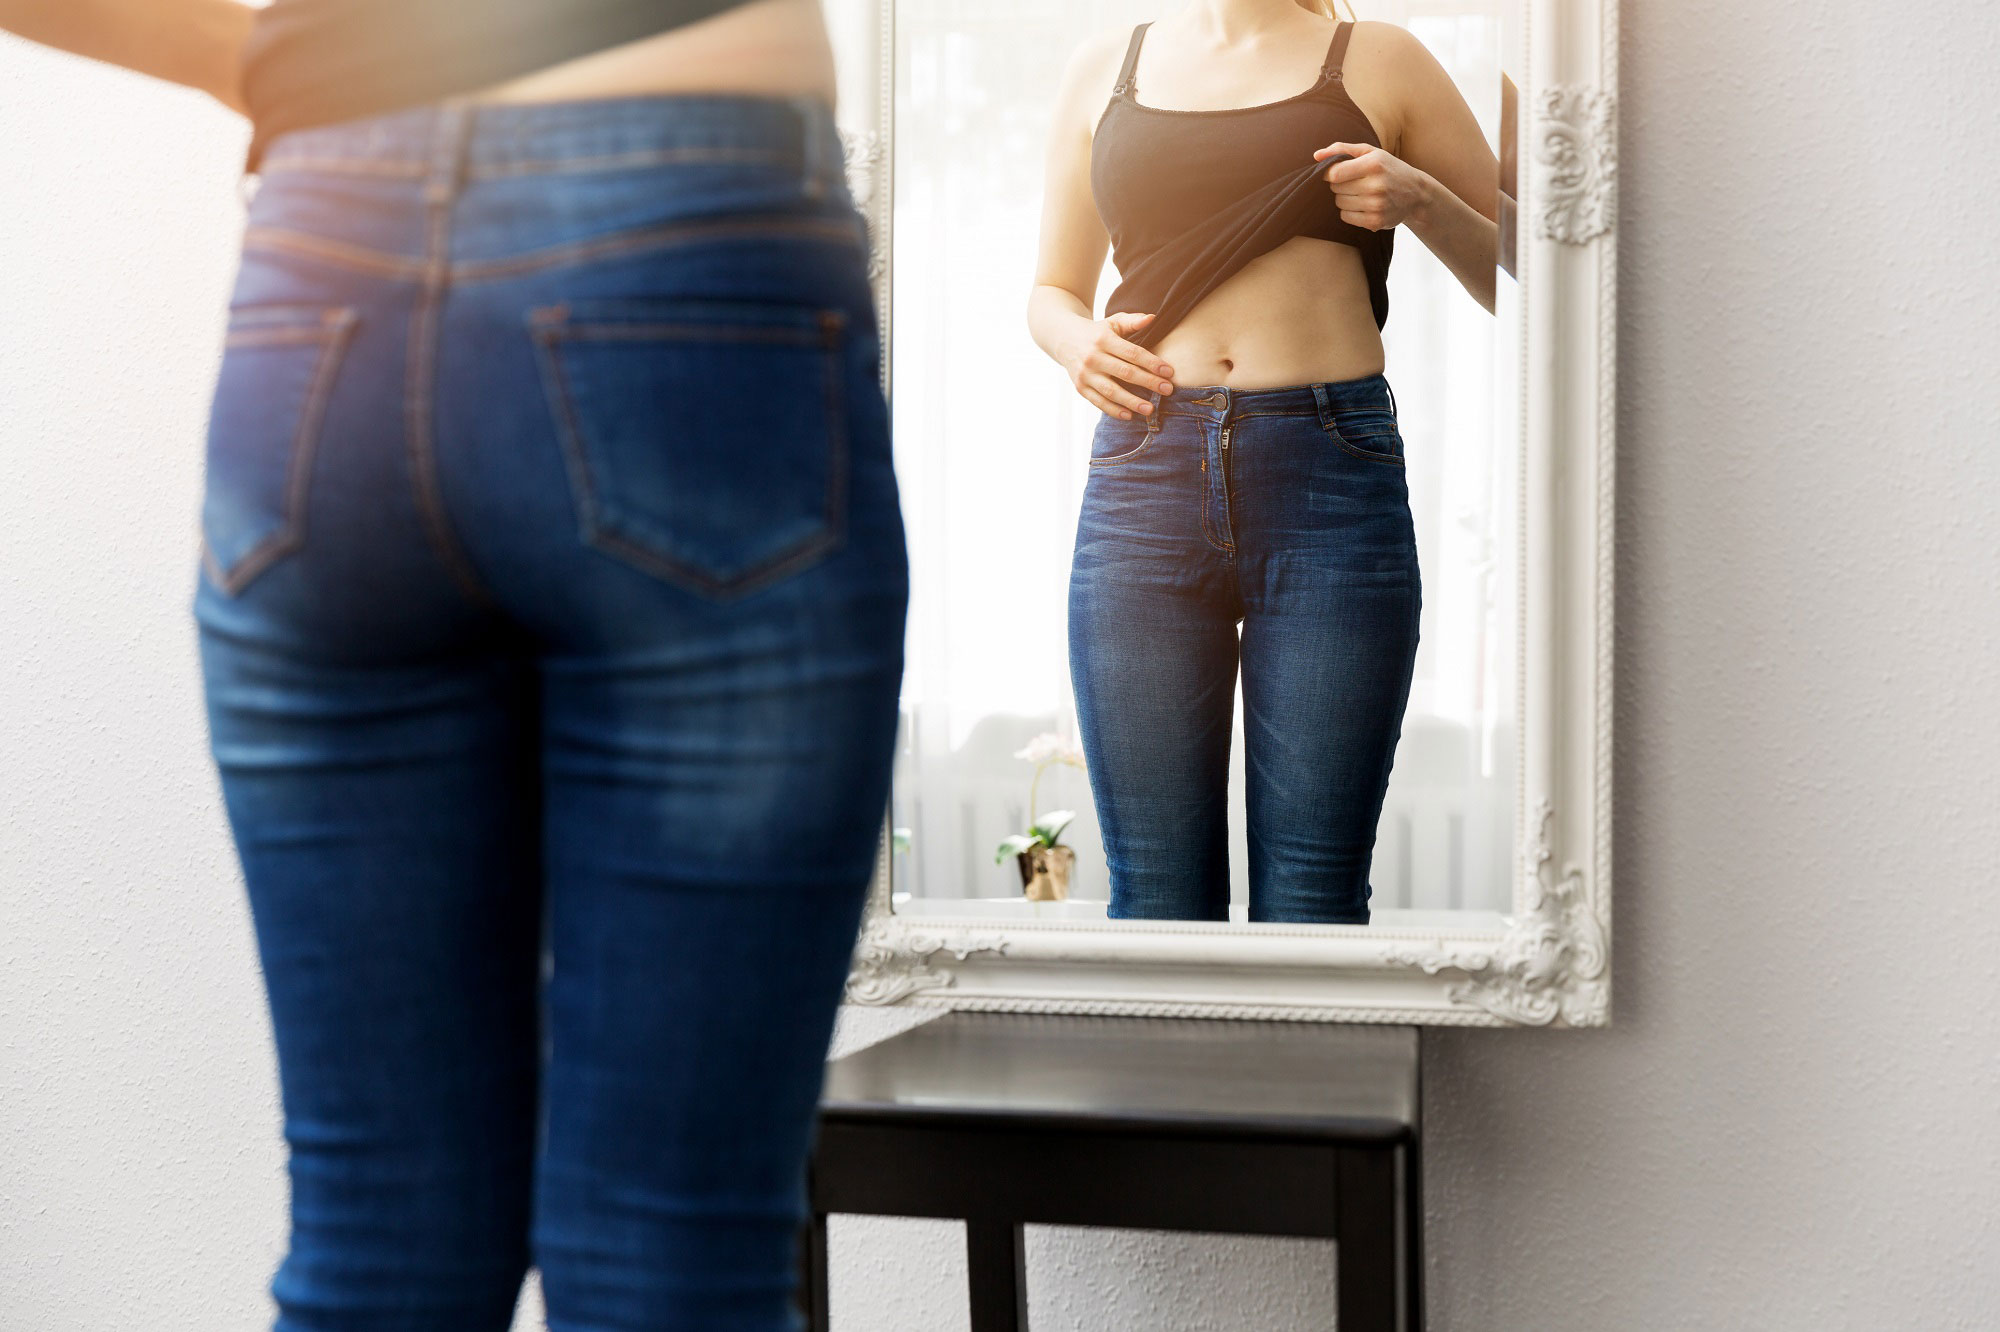 What to expect for your life AFTER weight loss surgery